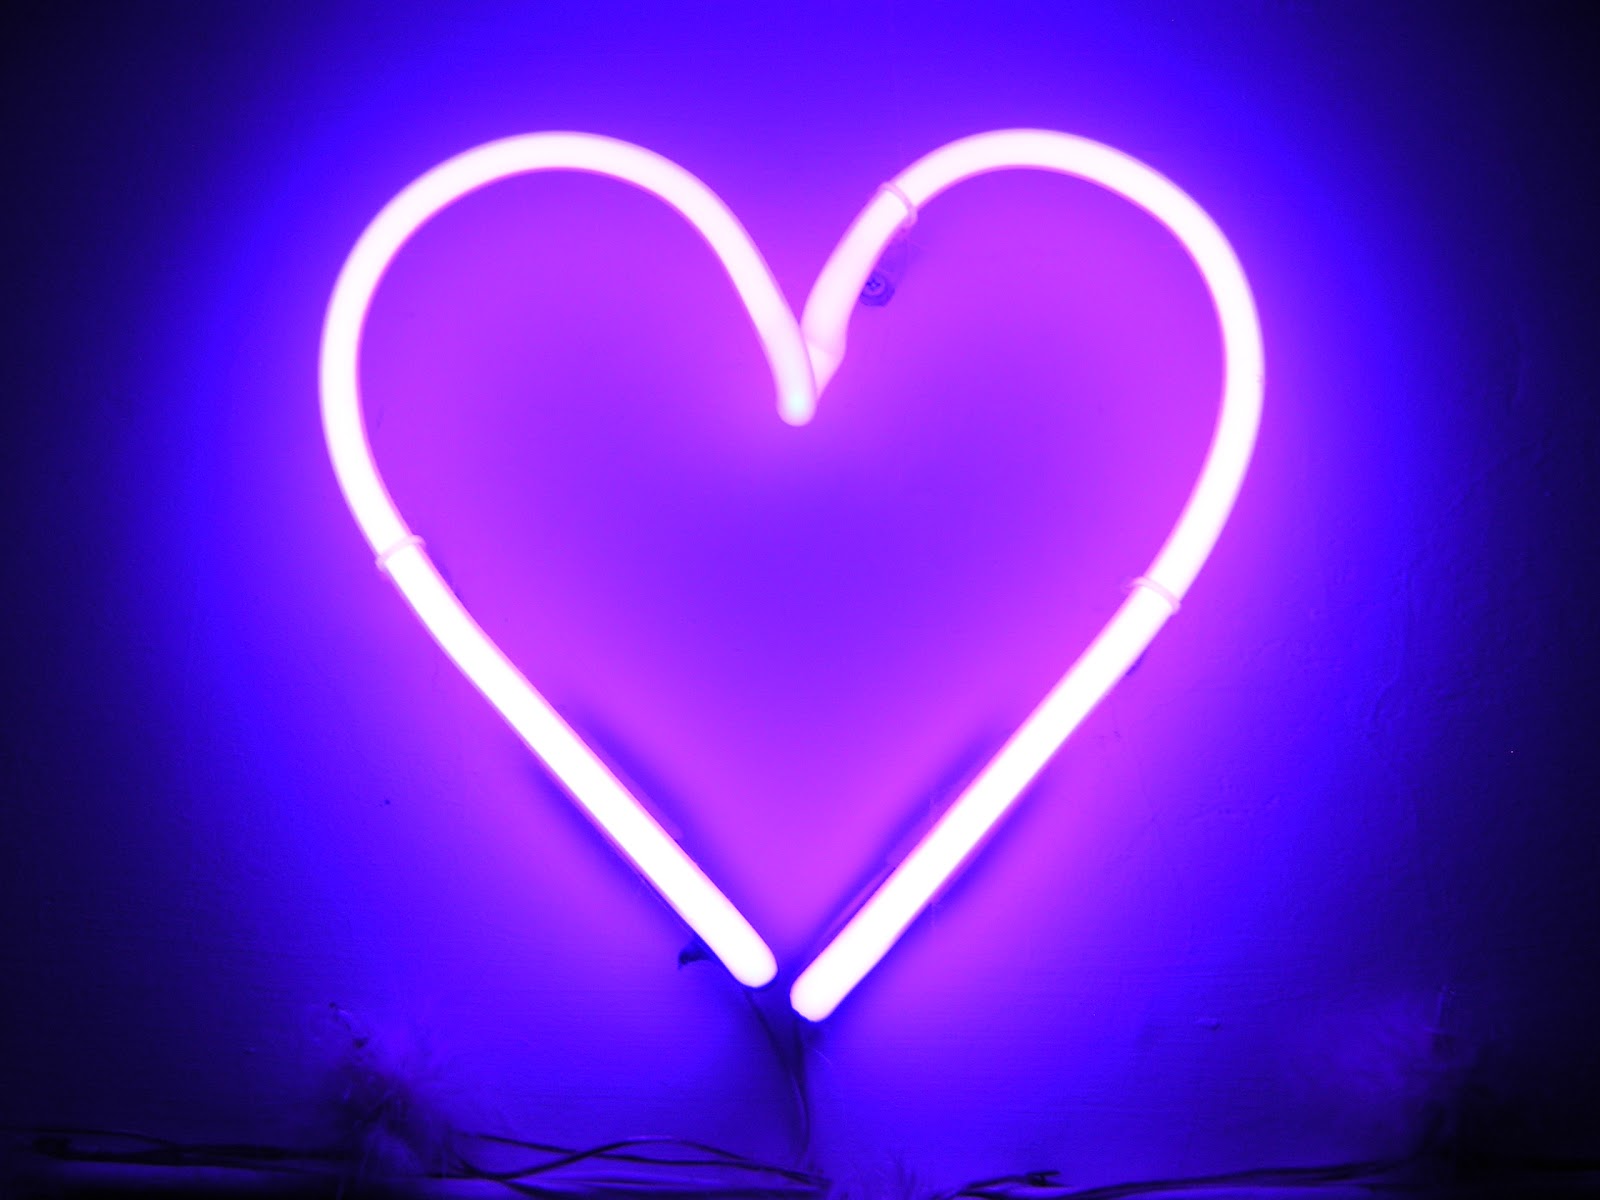 neonneon: Say It With Neon This Valentine's Day